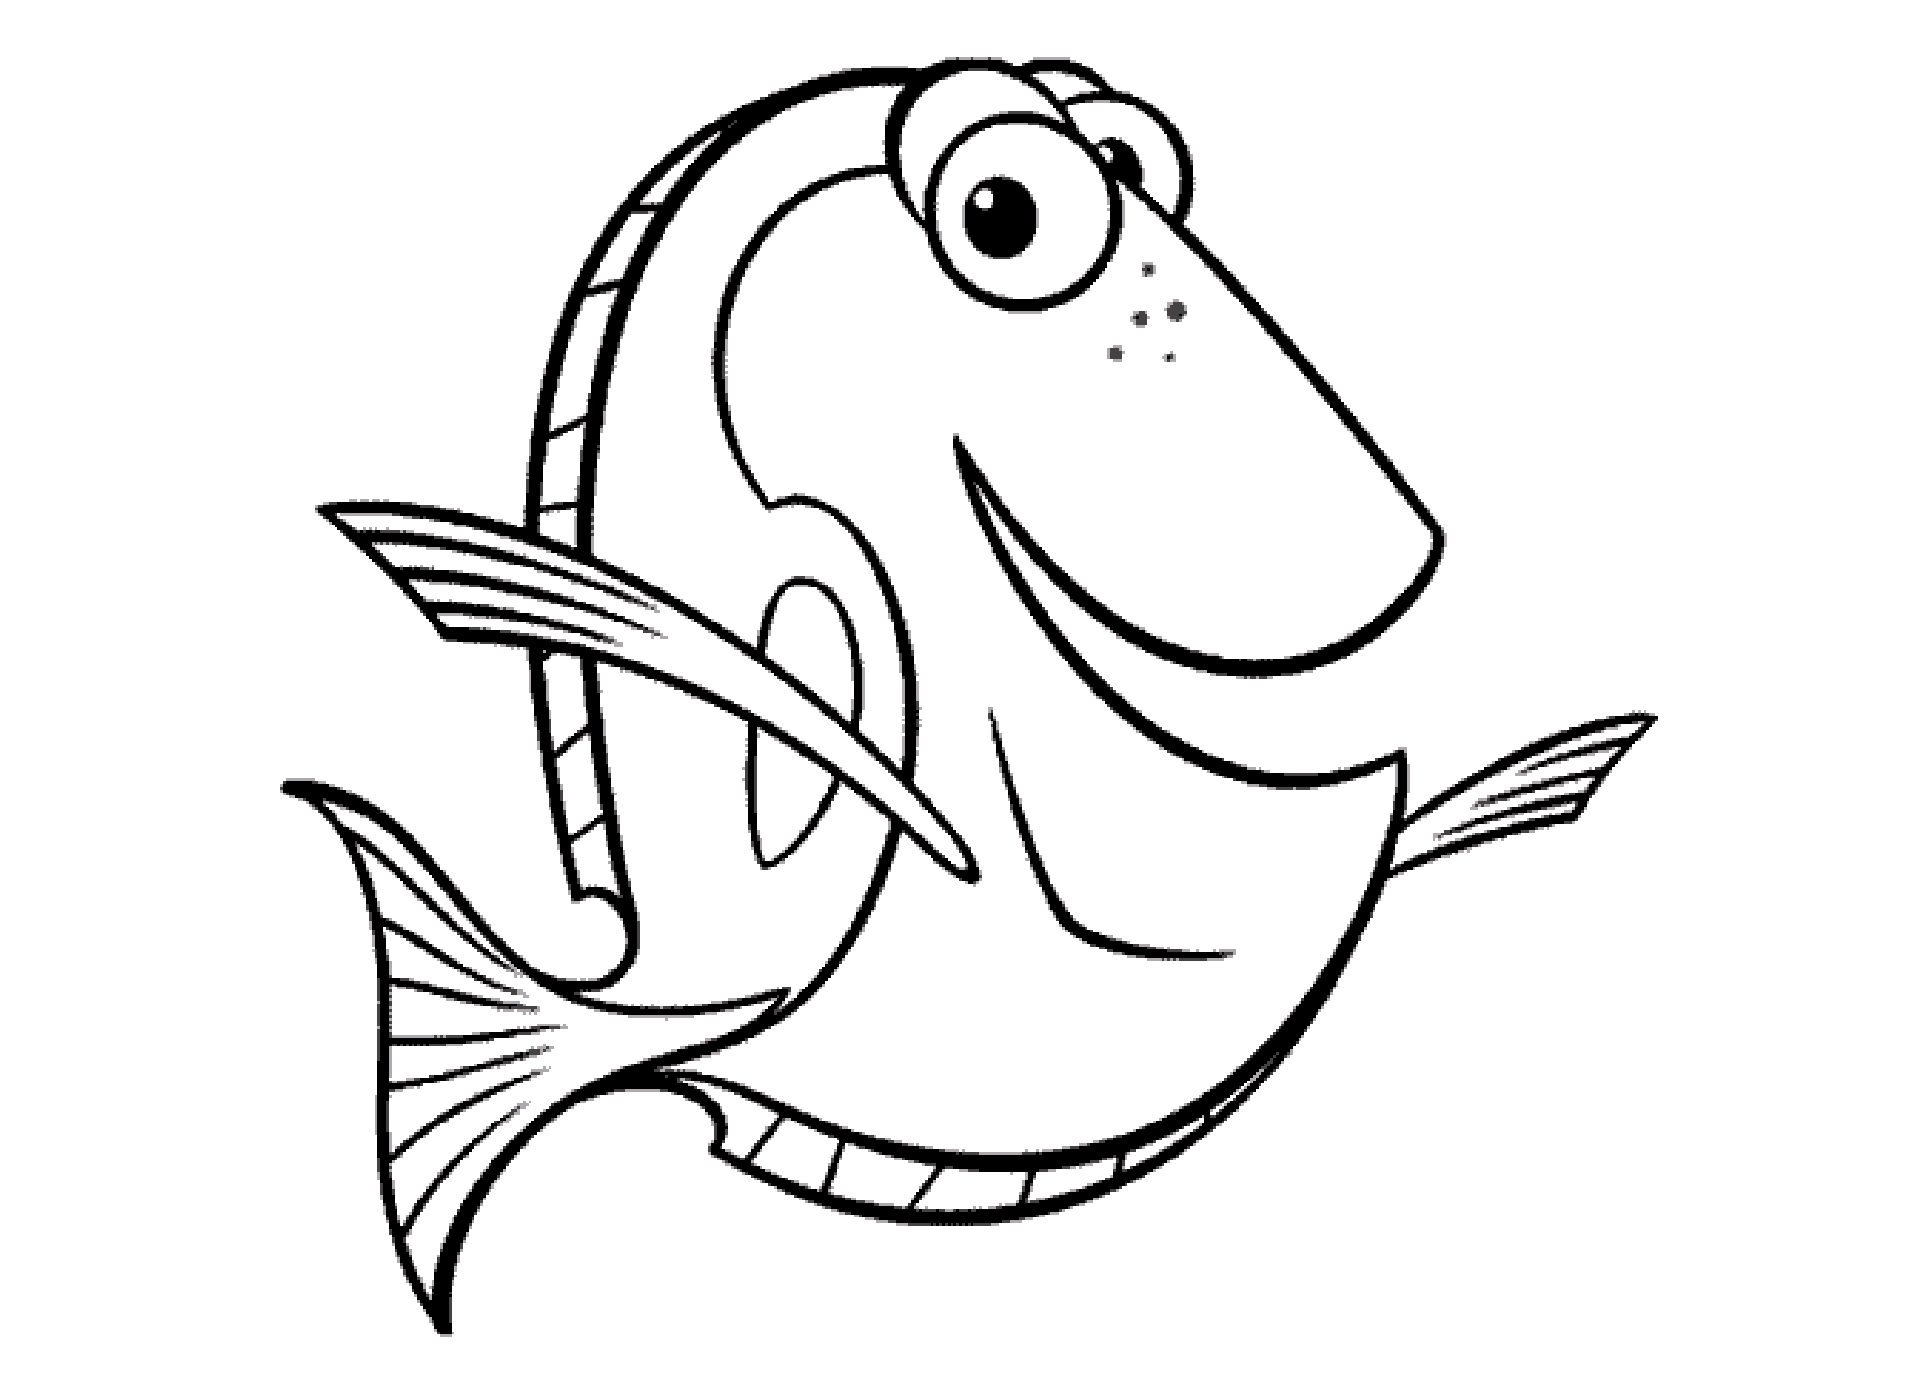 Finding dory for children   Finding Dory Kids Coloring Pages